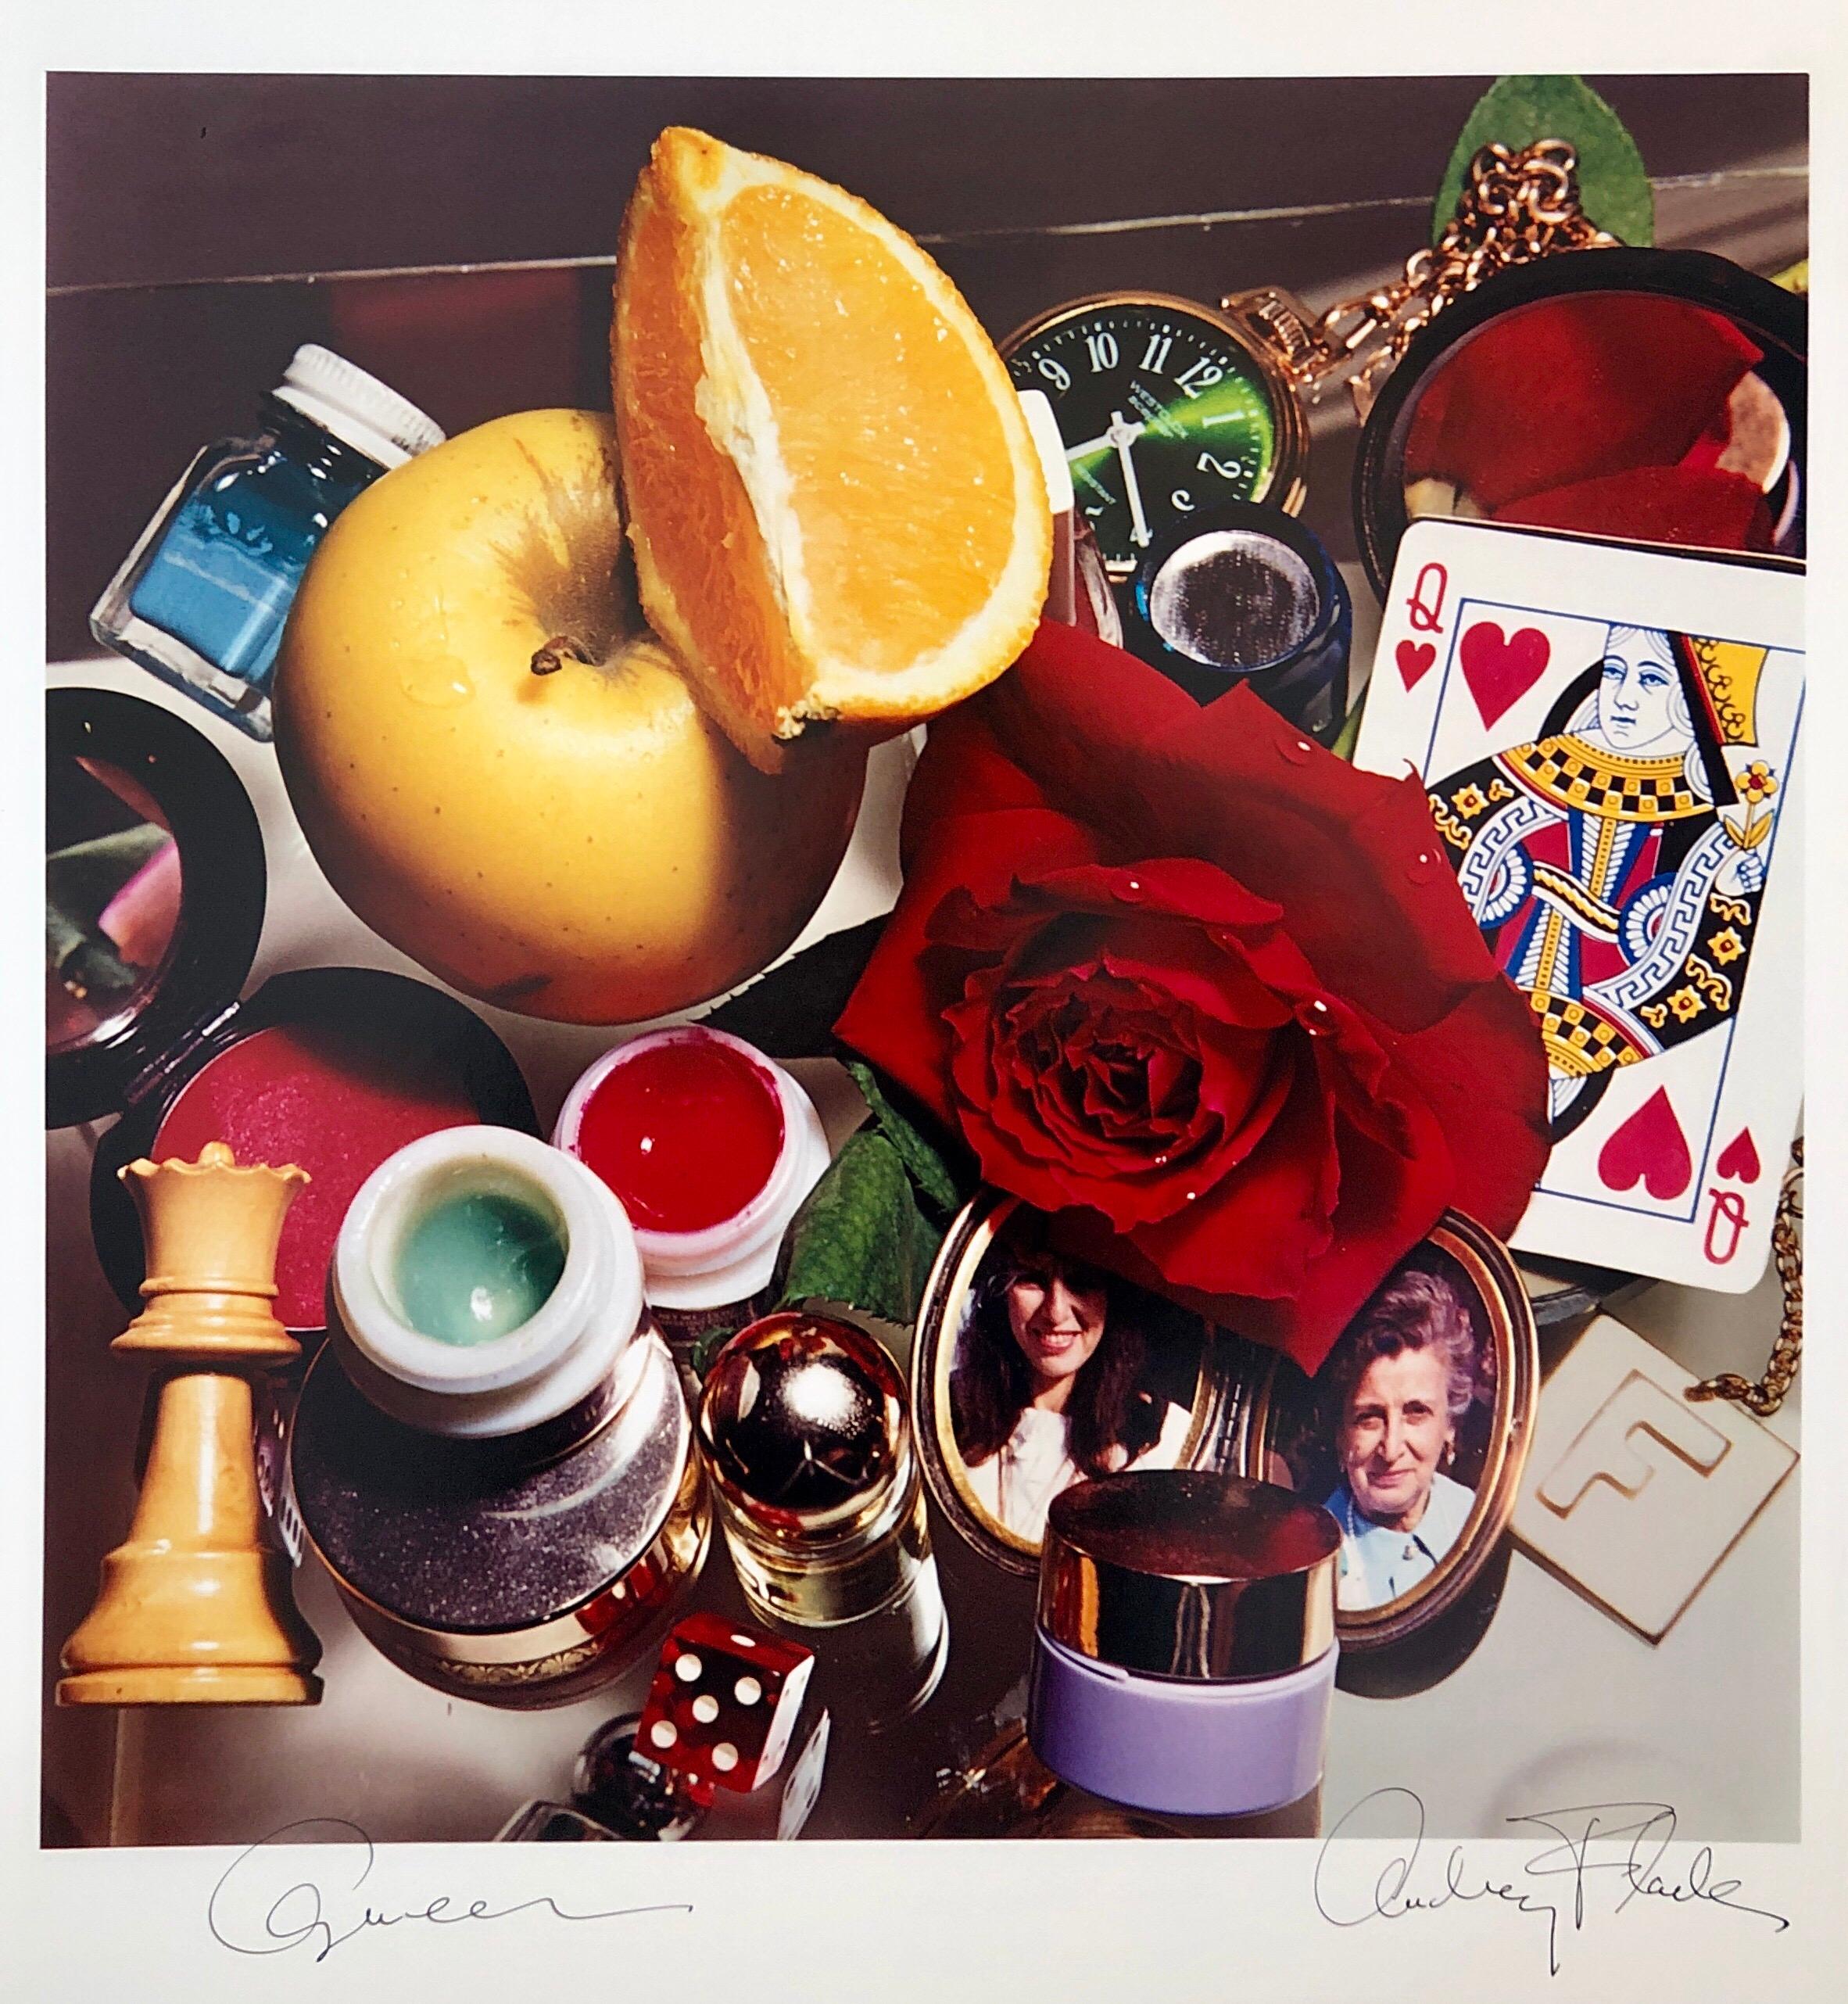 Hand signed and titled in ink by the artist from edition of 50 (plus proofs). Color Photo printed at CVI Lab by master printer Guy Stricherz. Published by Prestige Art Ltd. From the color saturated 1980's. "Queen" featuring a red rose, paint, a